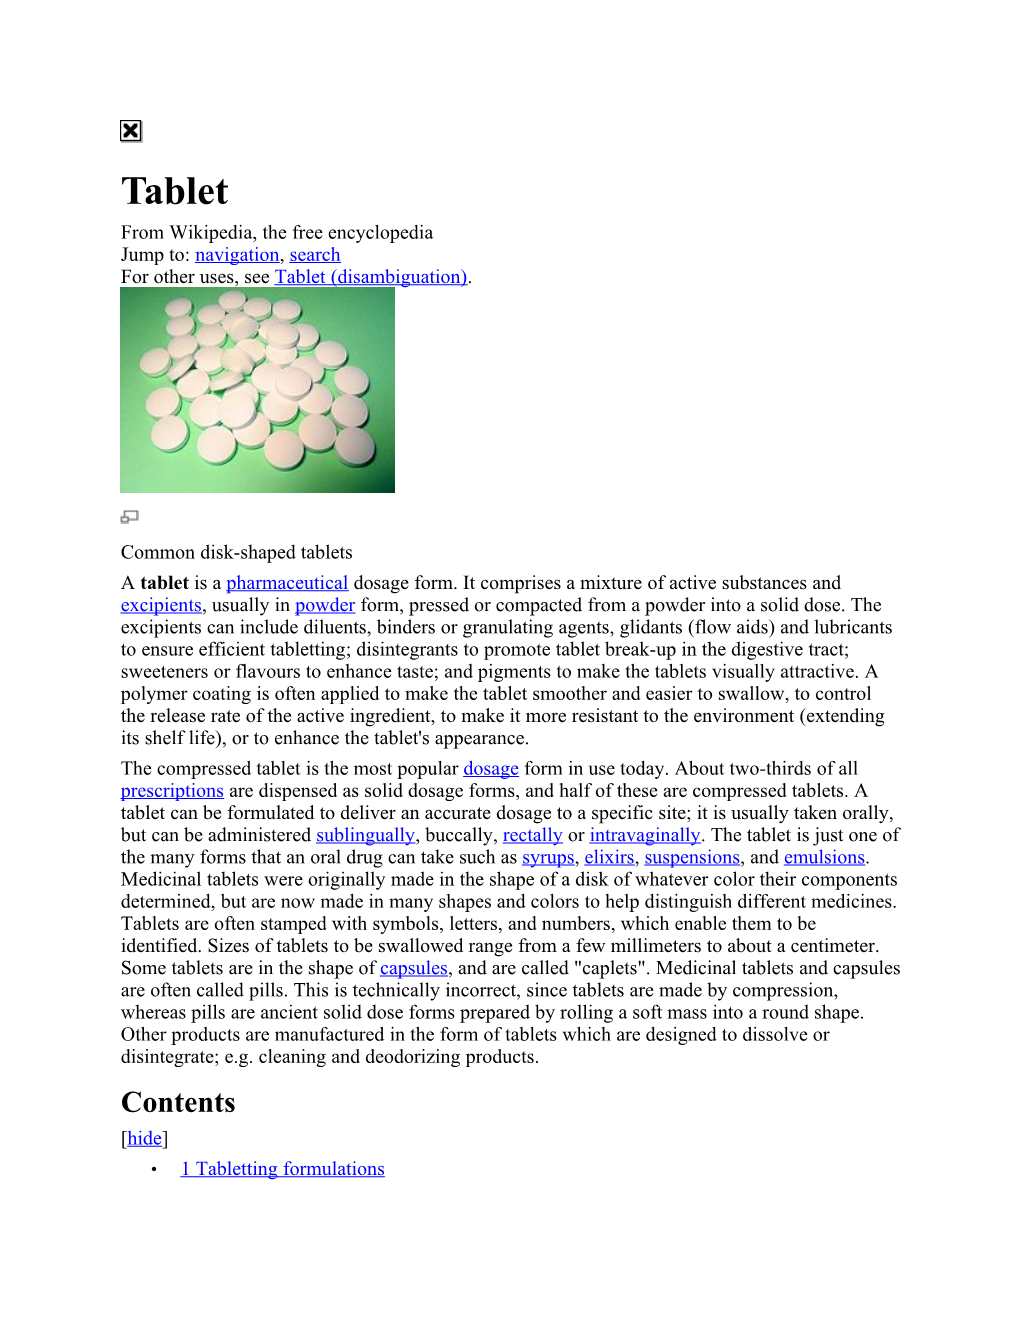 Tablet Presses • 7 Tablet Coating • 8 Pill-Splitters • 9 See Also • 10 References [Edit] Tabletting Formulations